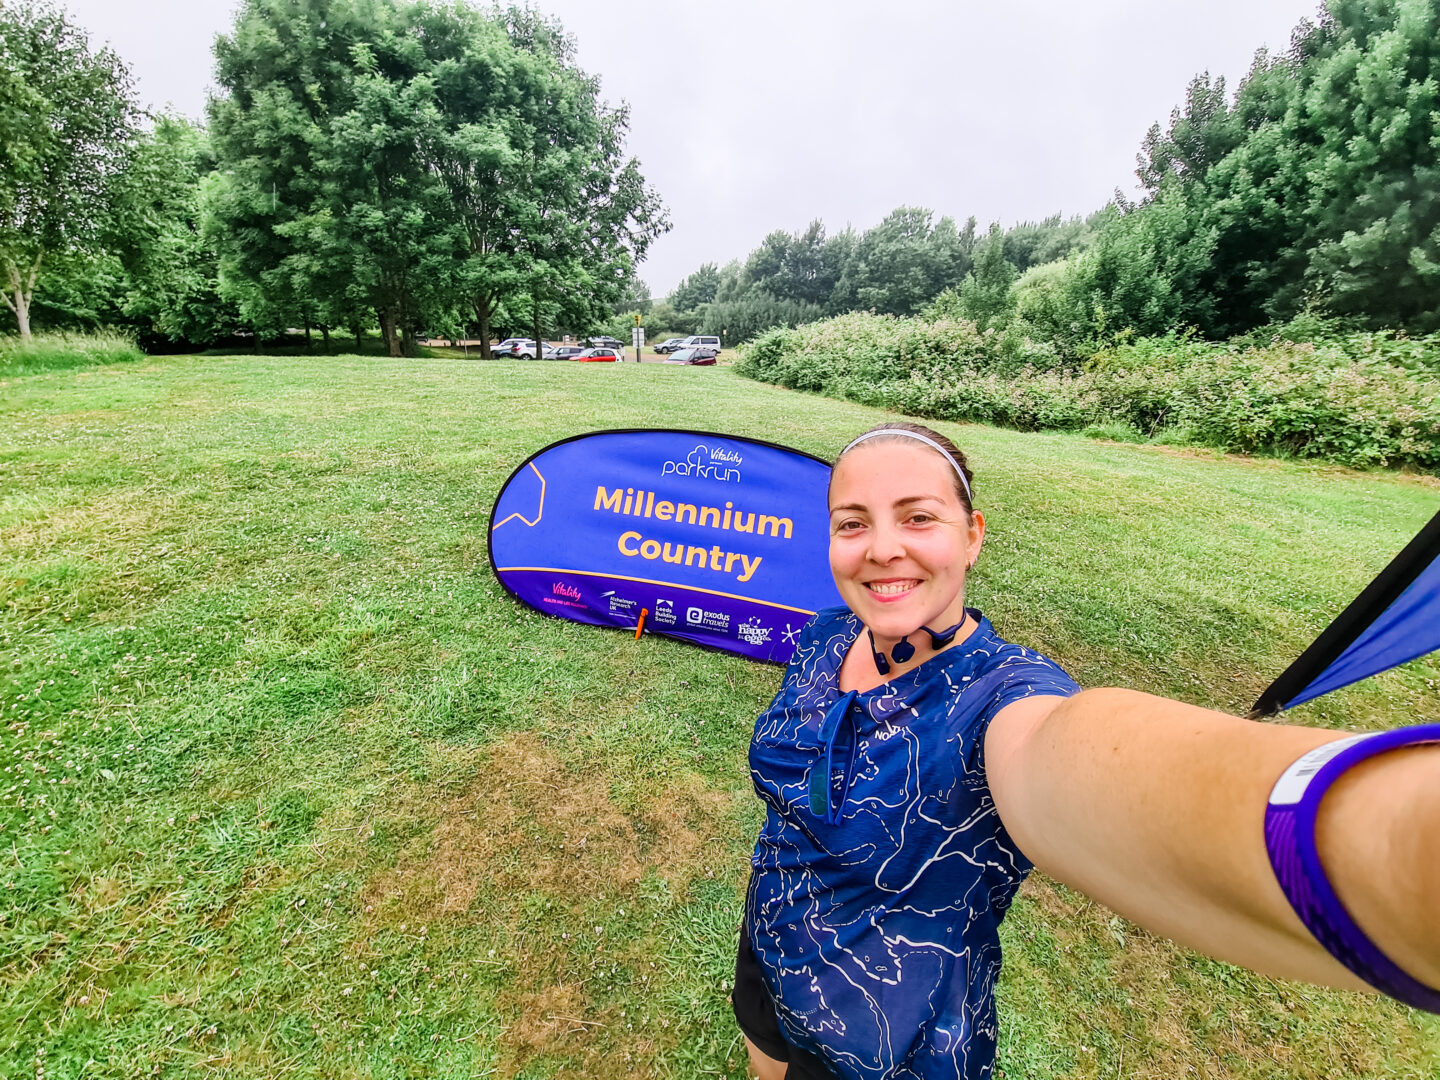 selfie of a smiling woman wearing a running top. She is standing on green grass in front of a blue sign that reads Millennium Country parkrun